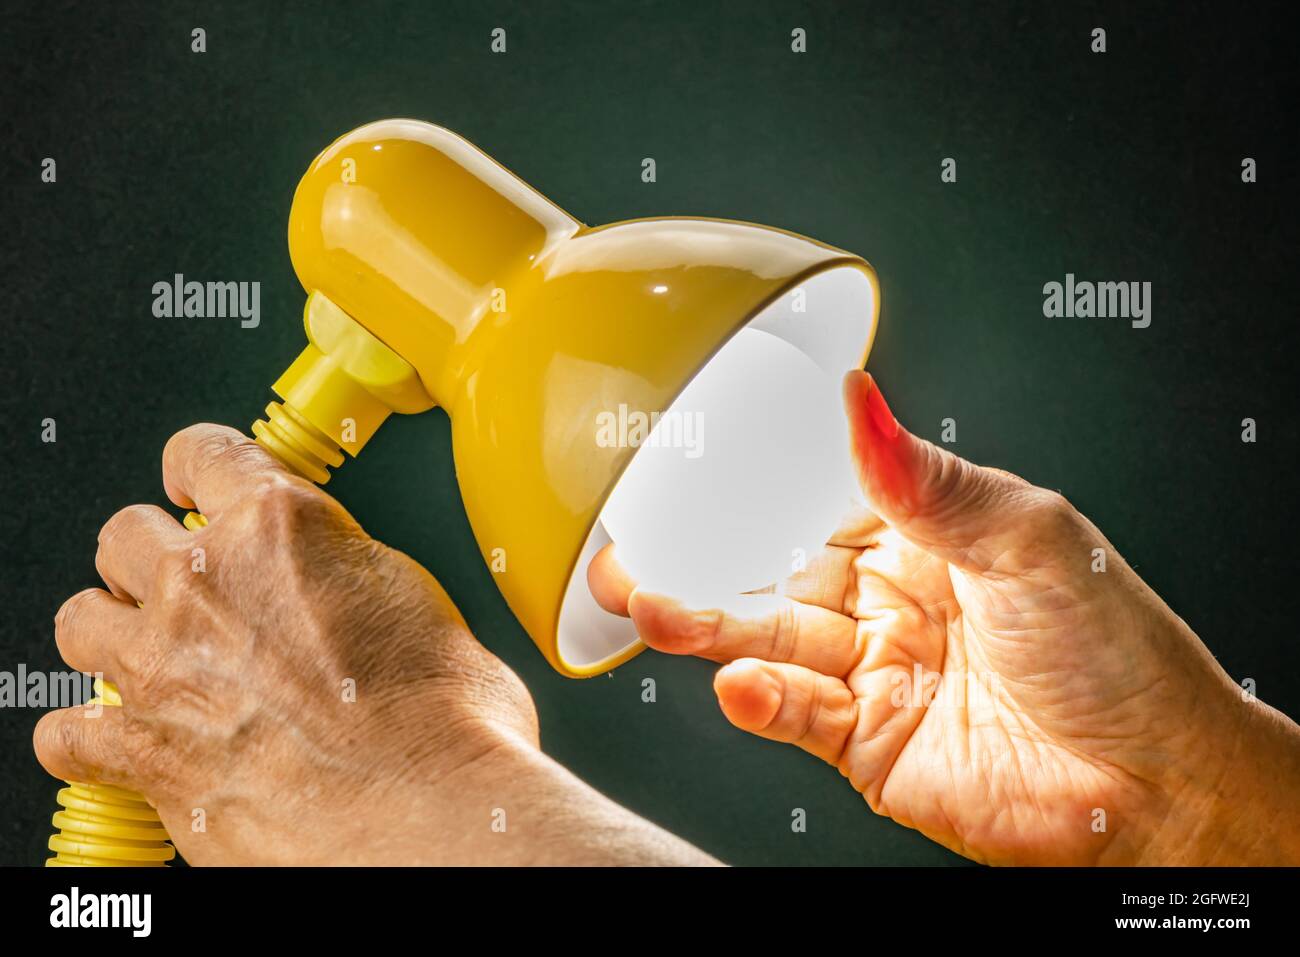 Putting new led light bulb into the socket of desk lamp. Senior hand replaced new light bulb of reading lamp and turning on. Stock Photo